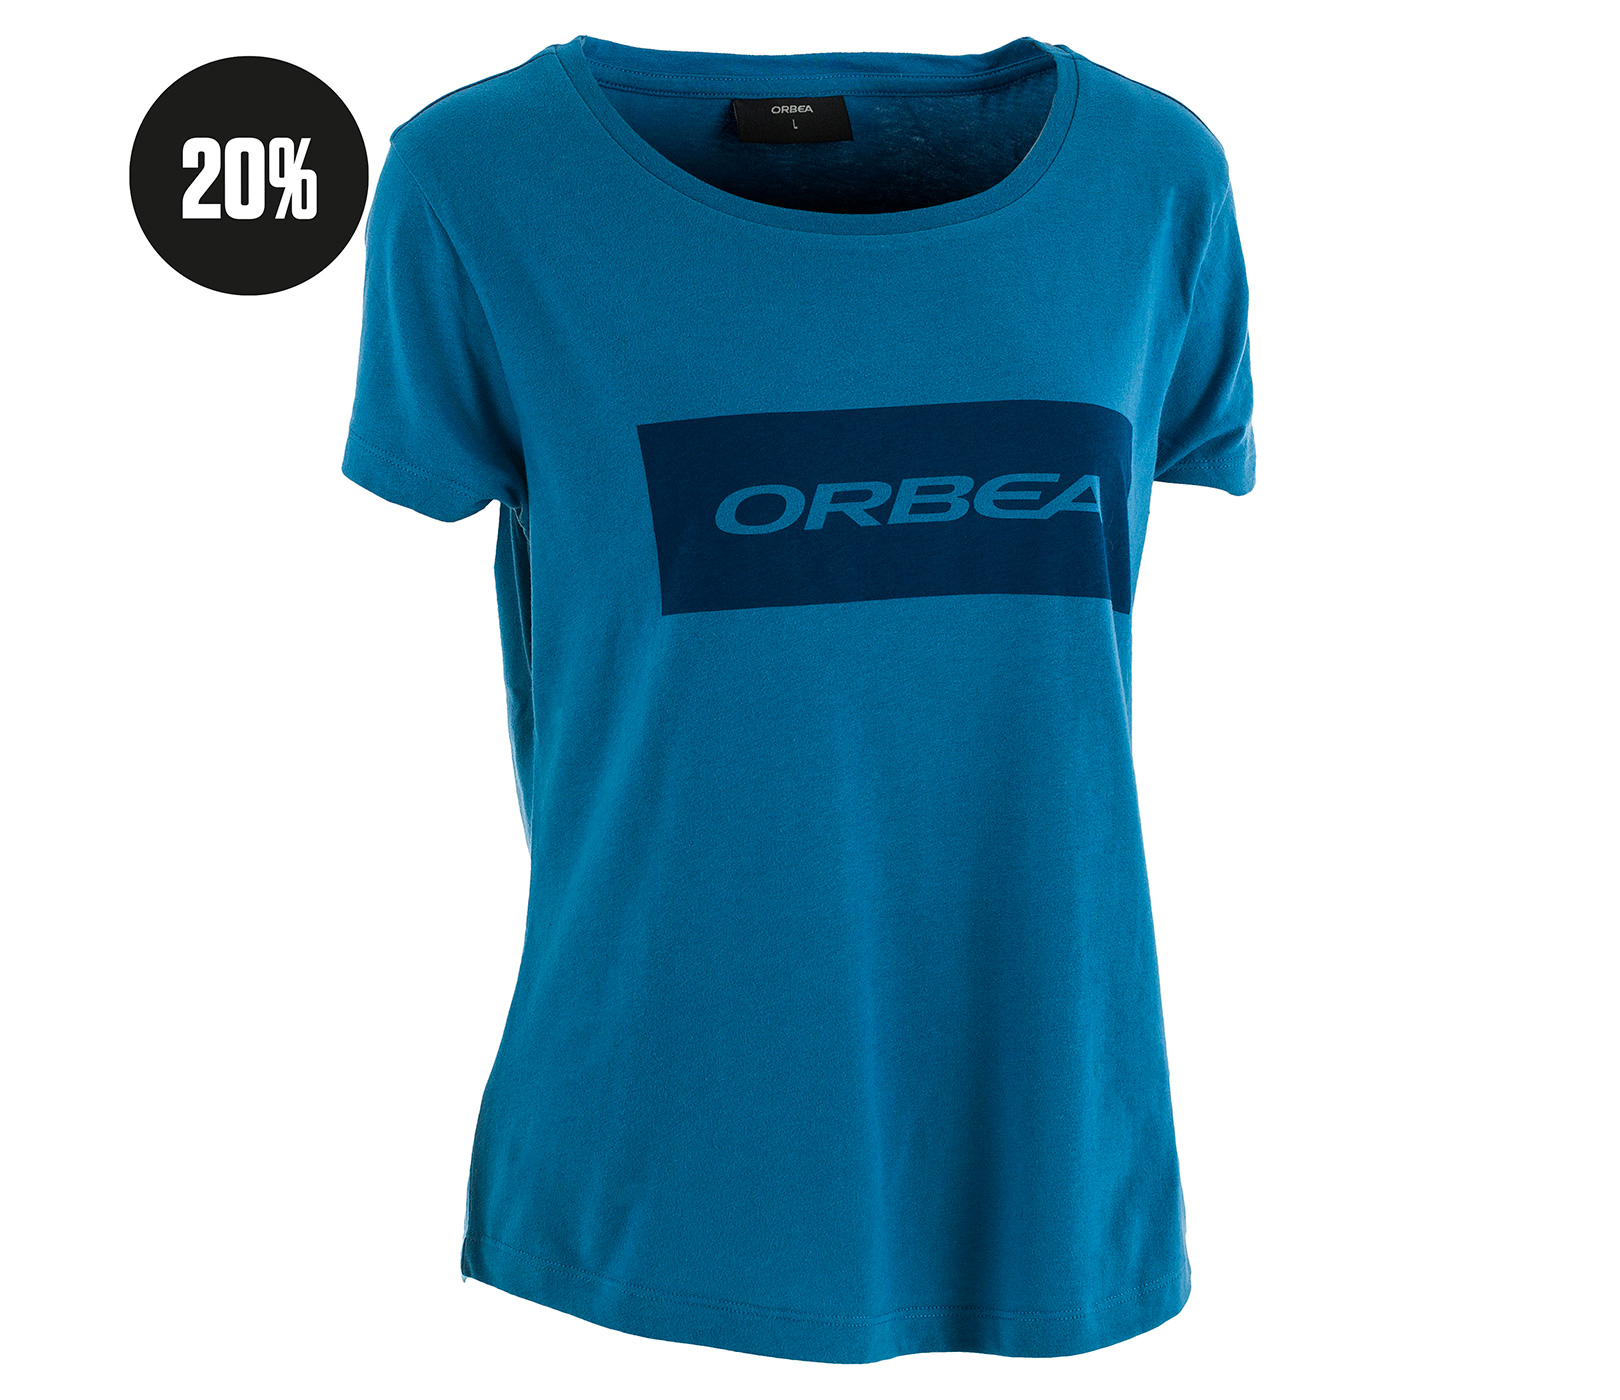 orbea casual clothing